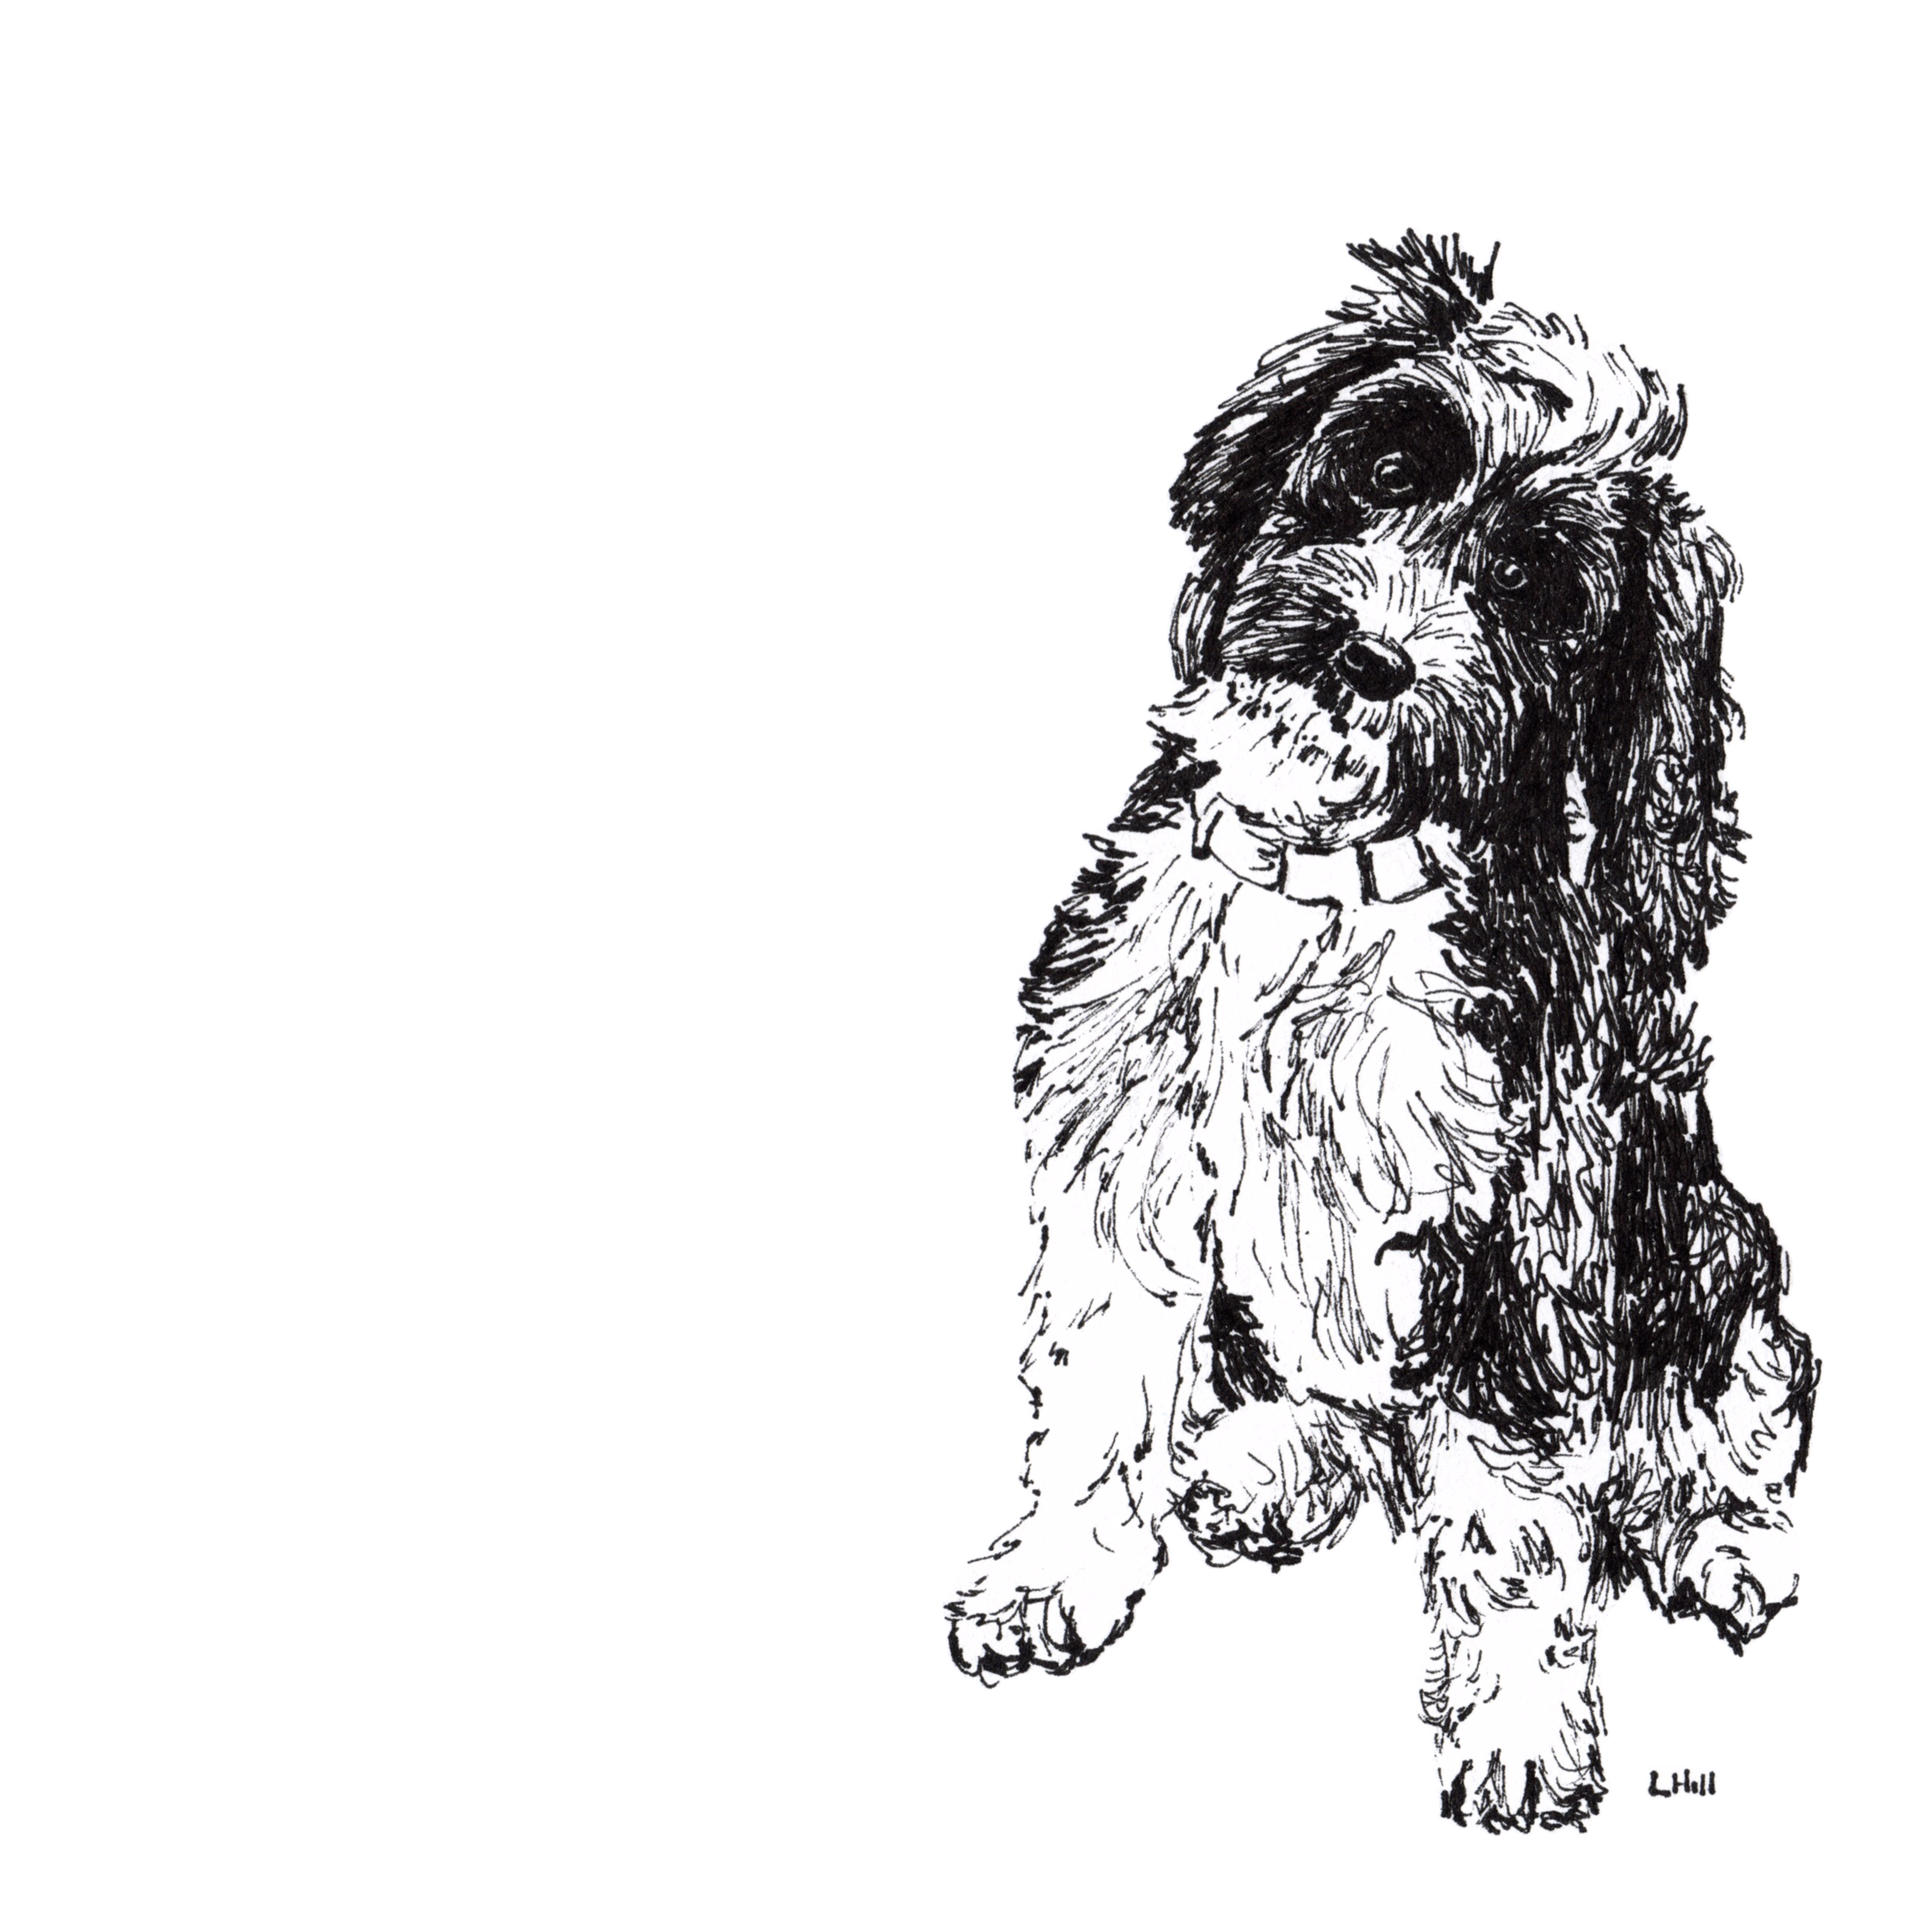 Cockapoo pen and ink illustration by Louisa Hill